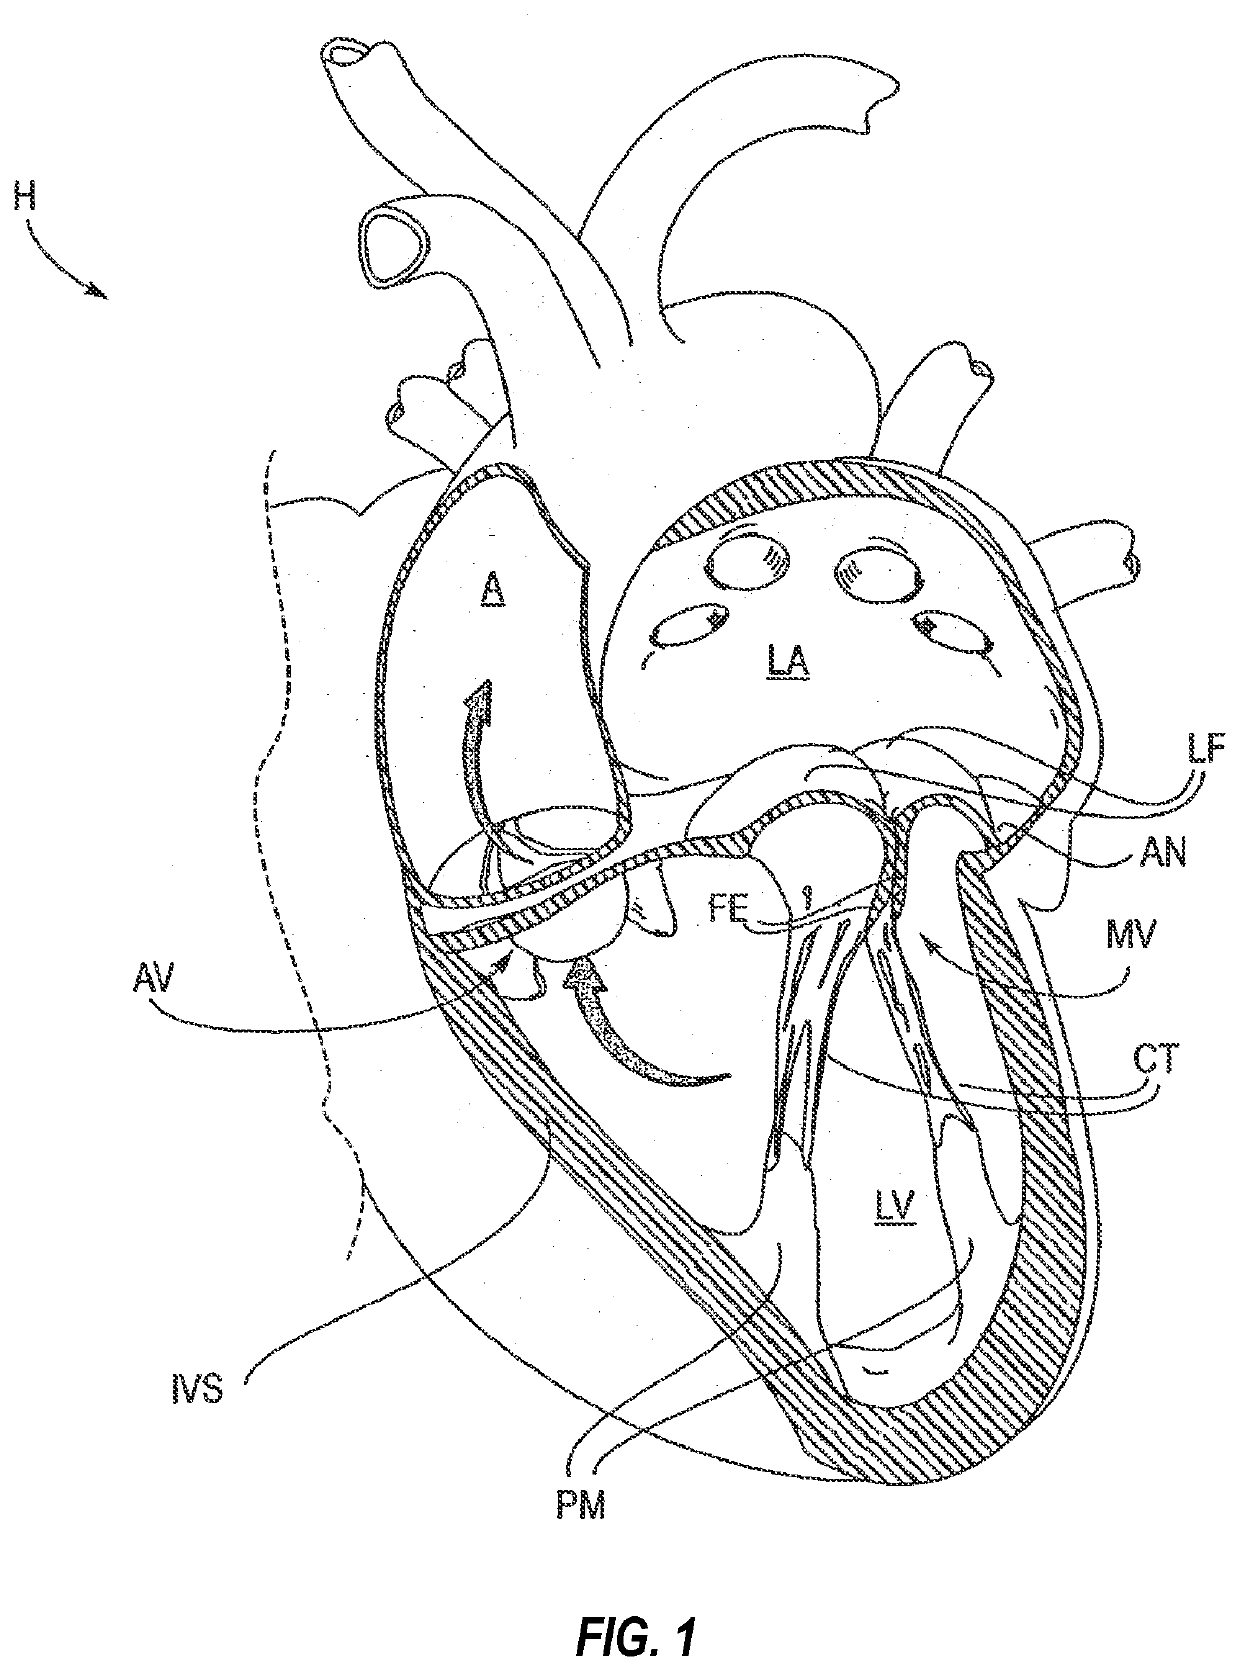 Systems, apparatuses, and methods for removing a medical implant from cardiac tissue